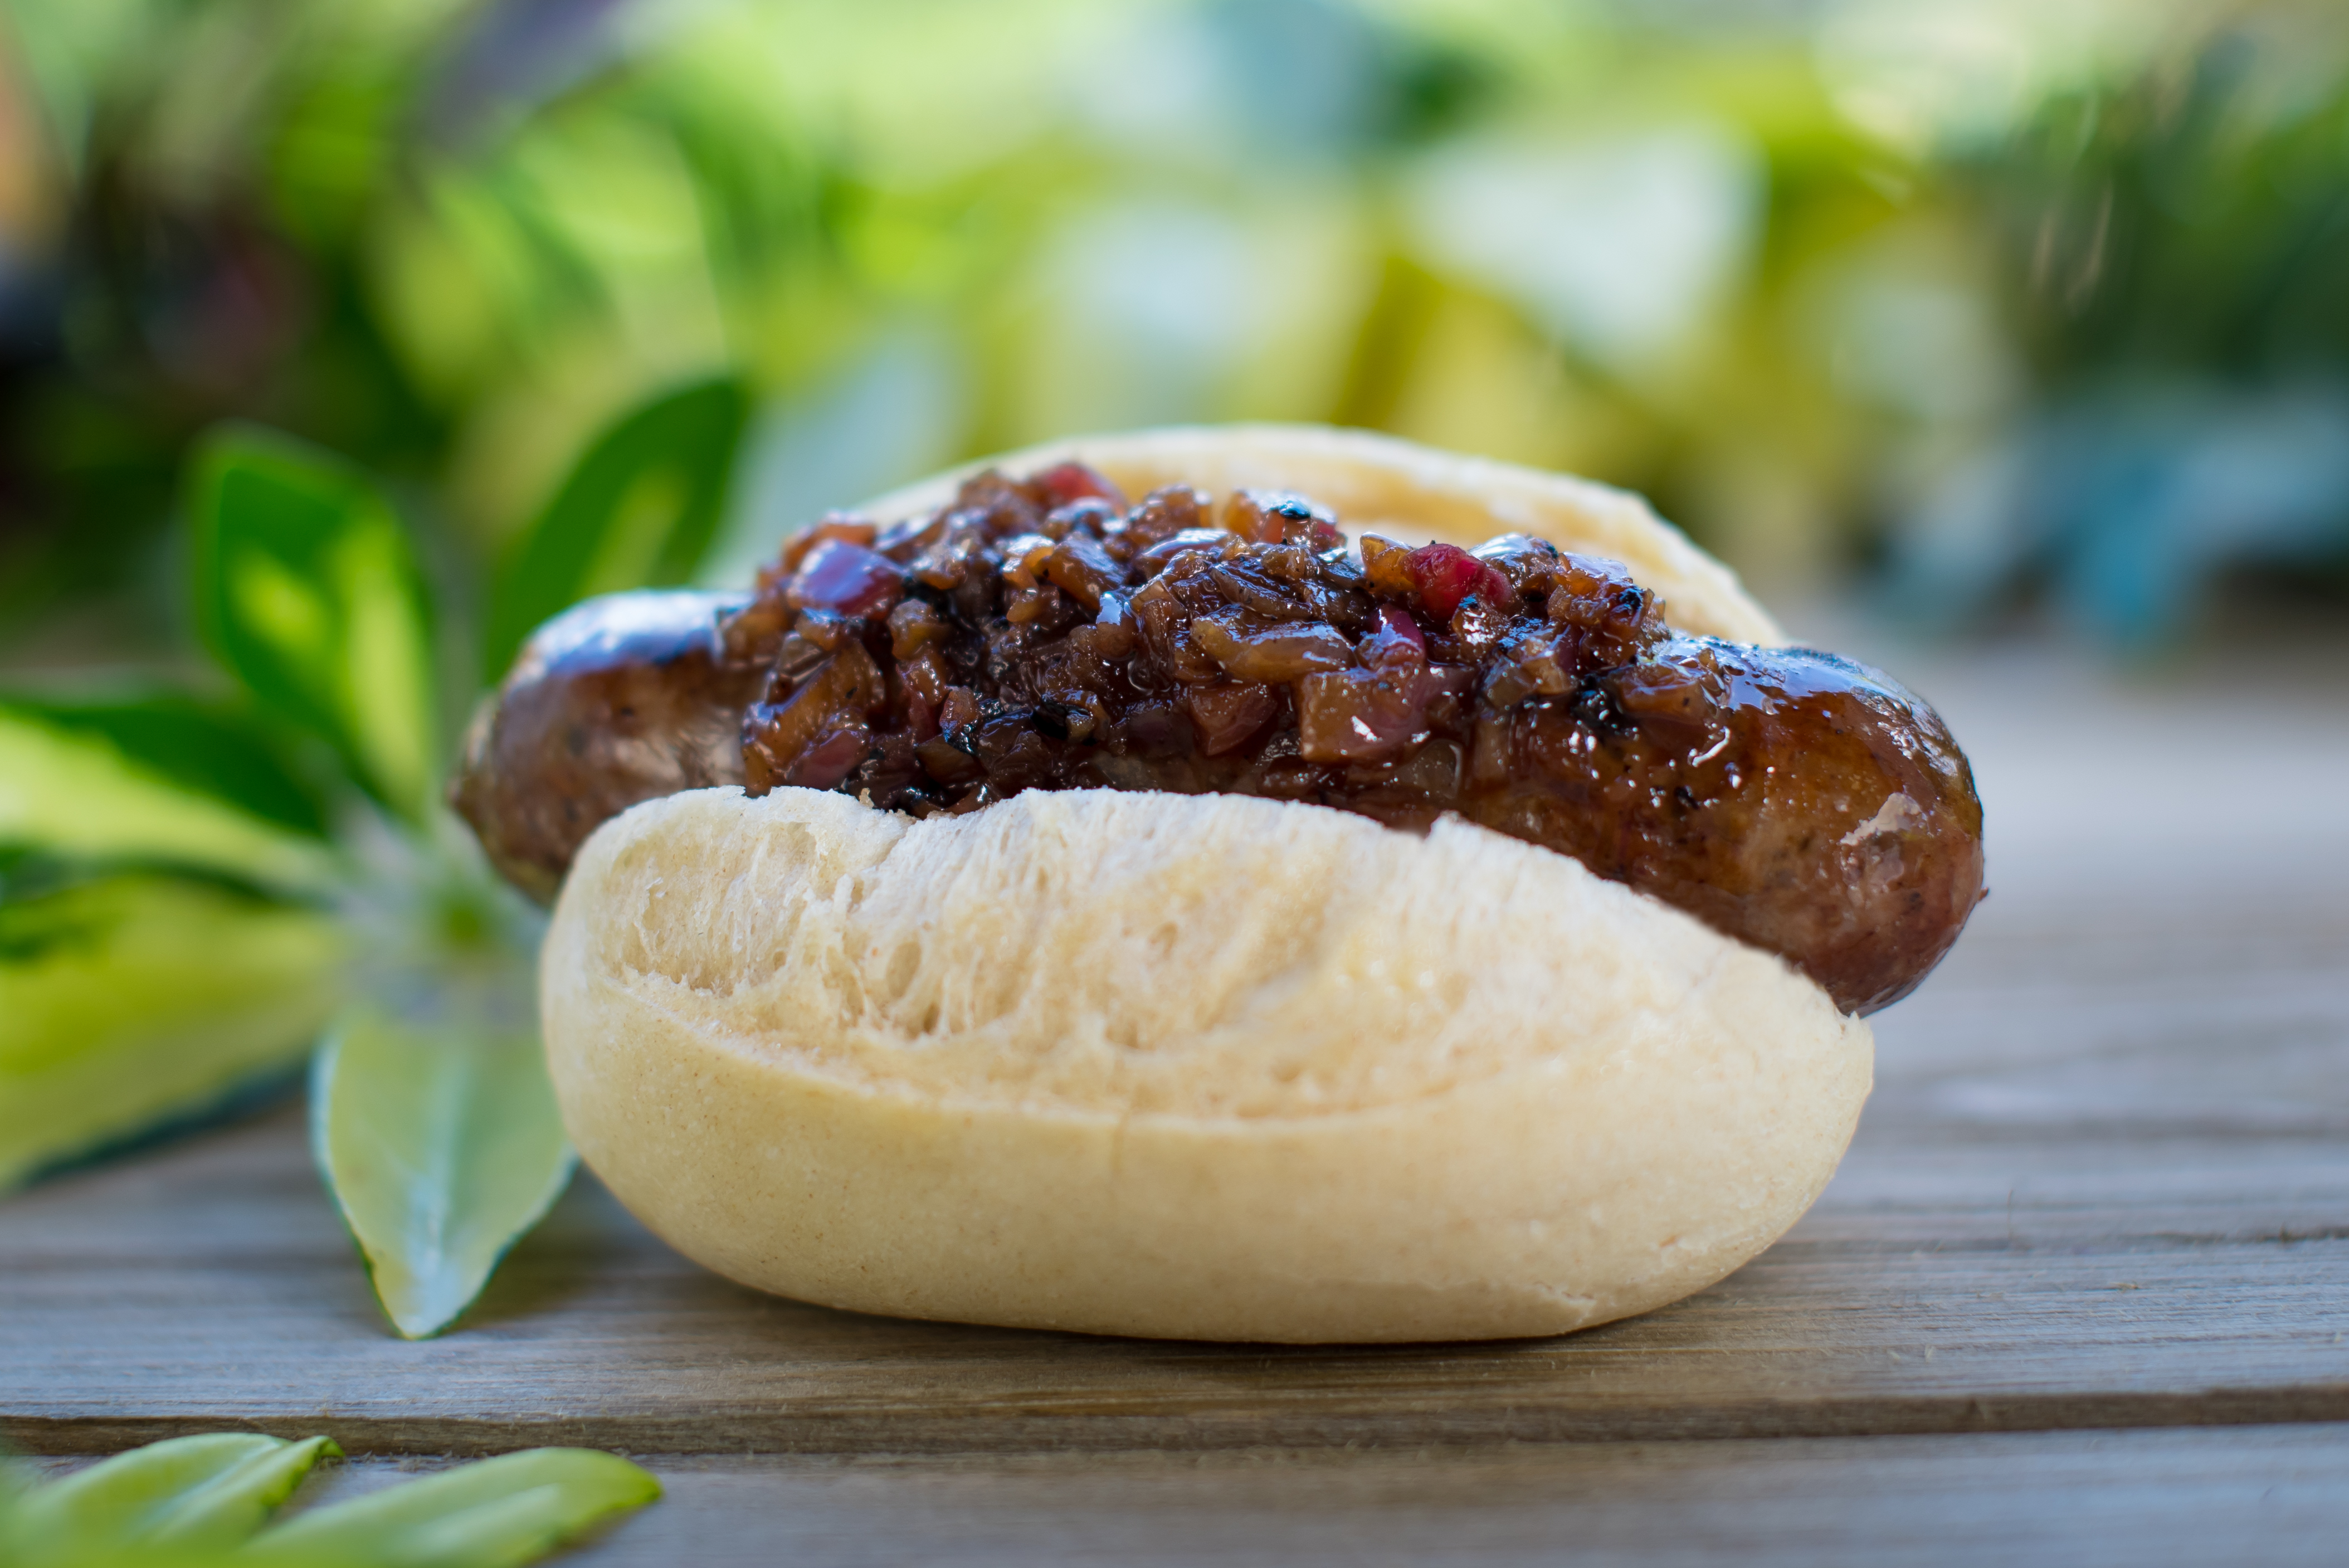 NEW Wild Boar Smoked Cheddar Sausage at the Florida Market